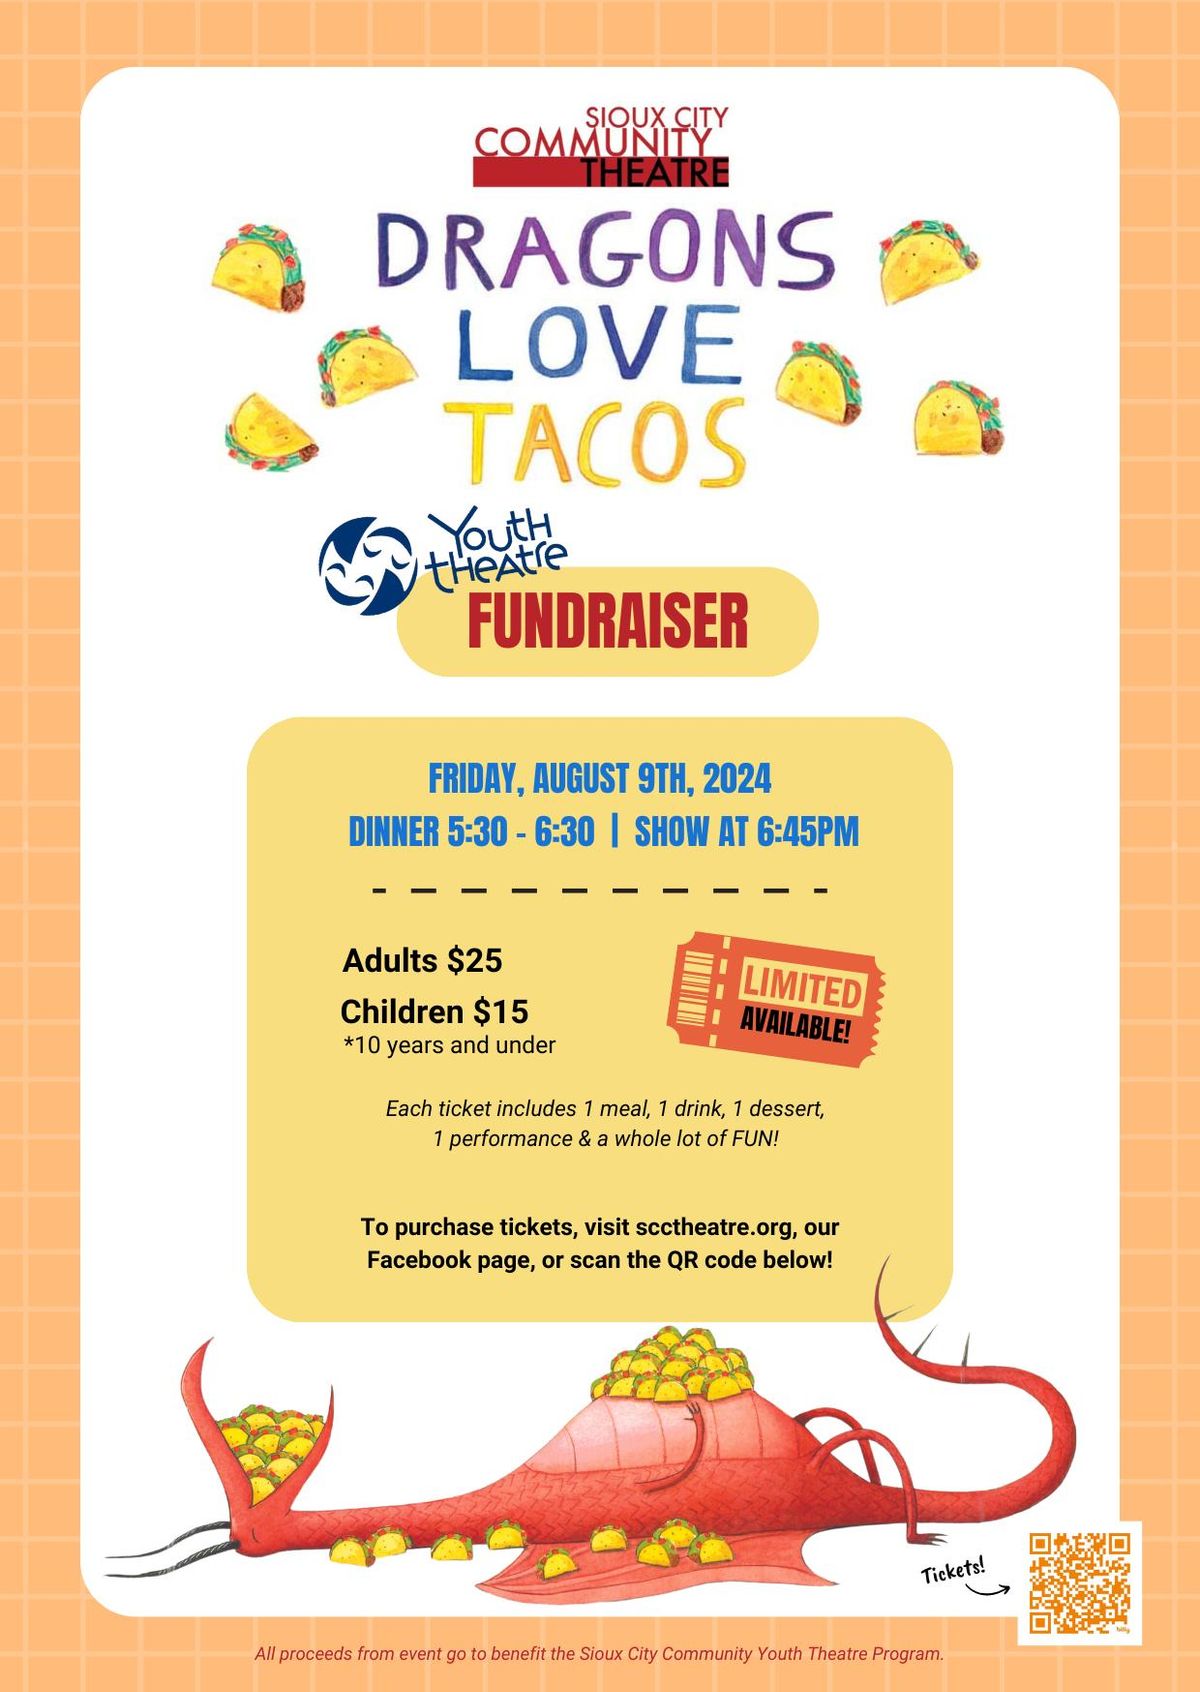 Dragons Love Tacos - Youth Theatre Fundraiser